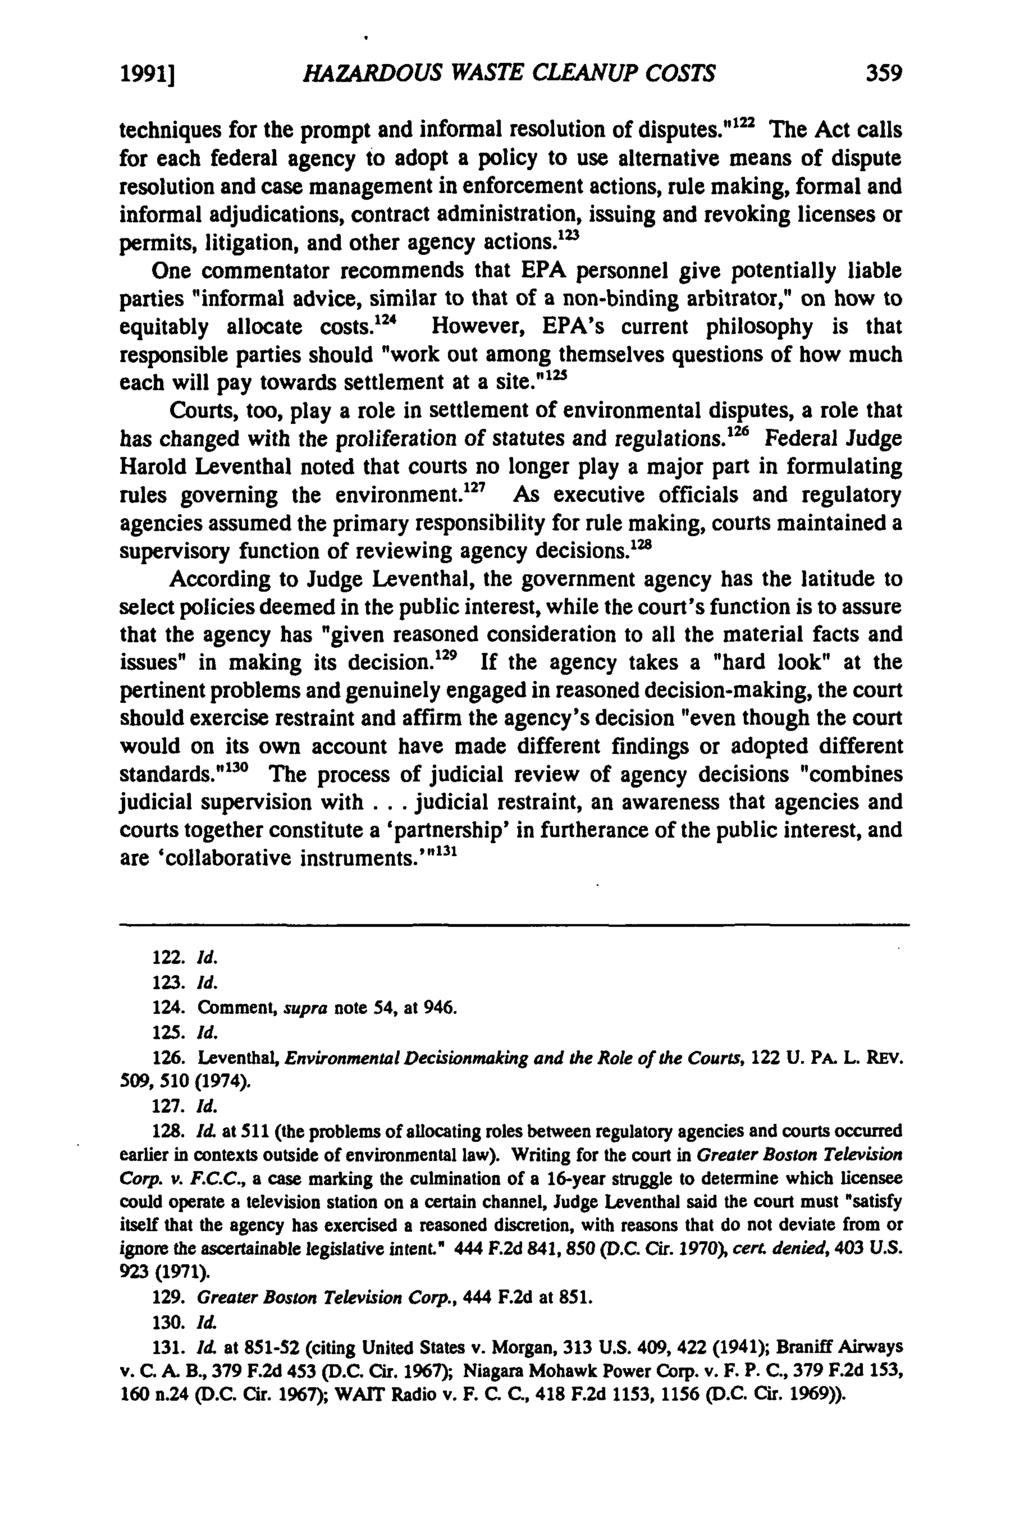 O'Brien: O'Brien: Arbitration Allocates Costs of Hazardous Waste Cleanup Claim under Superfund HAZARDOUS WASTE CLEANUP COSTS 1991] techniques for the prompt and informal resolution of disputes.